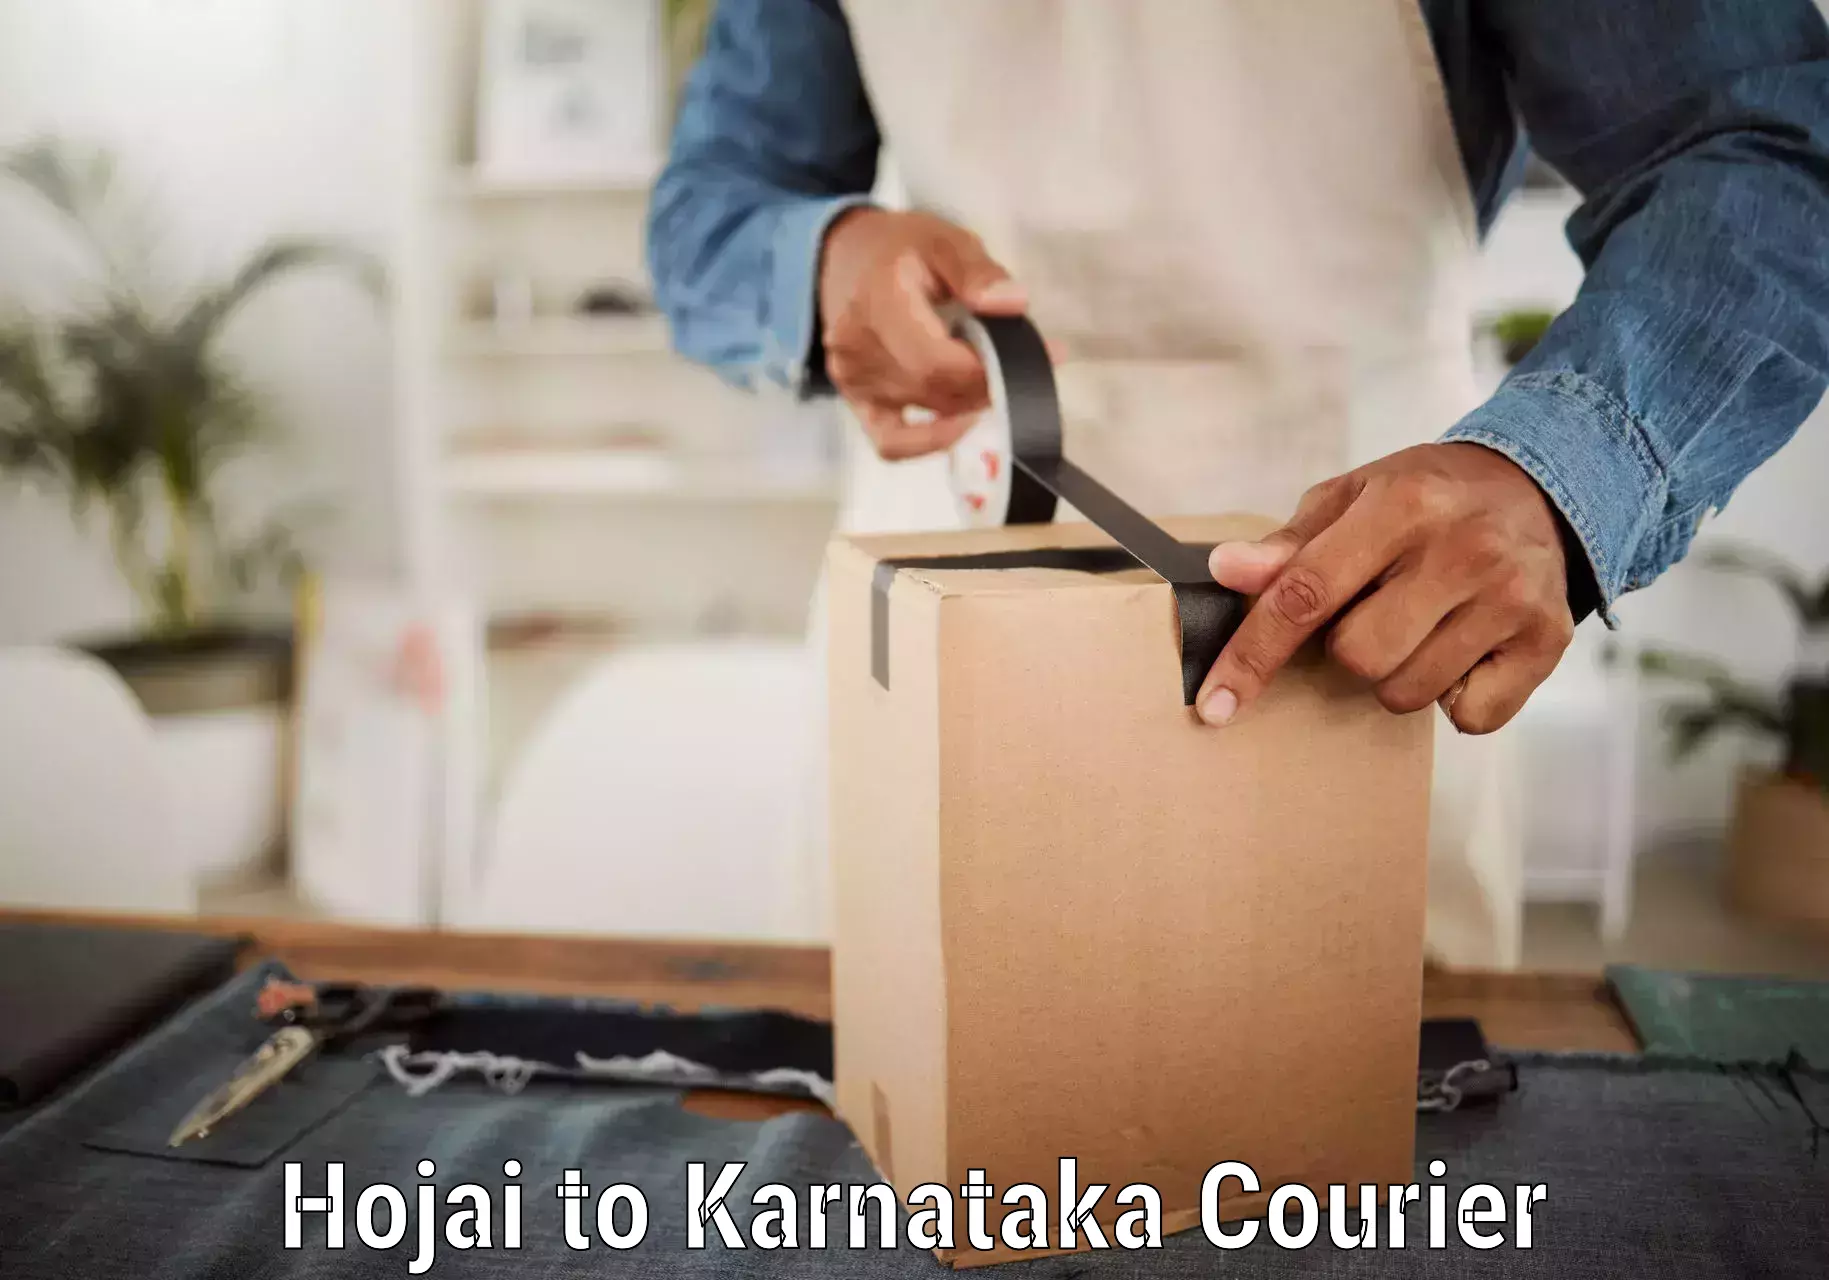 Courier service efficiency in Hojai to Ankola